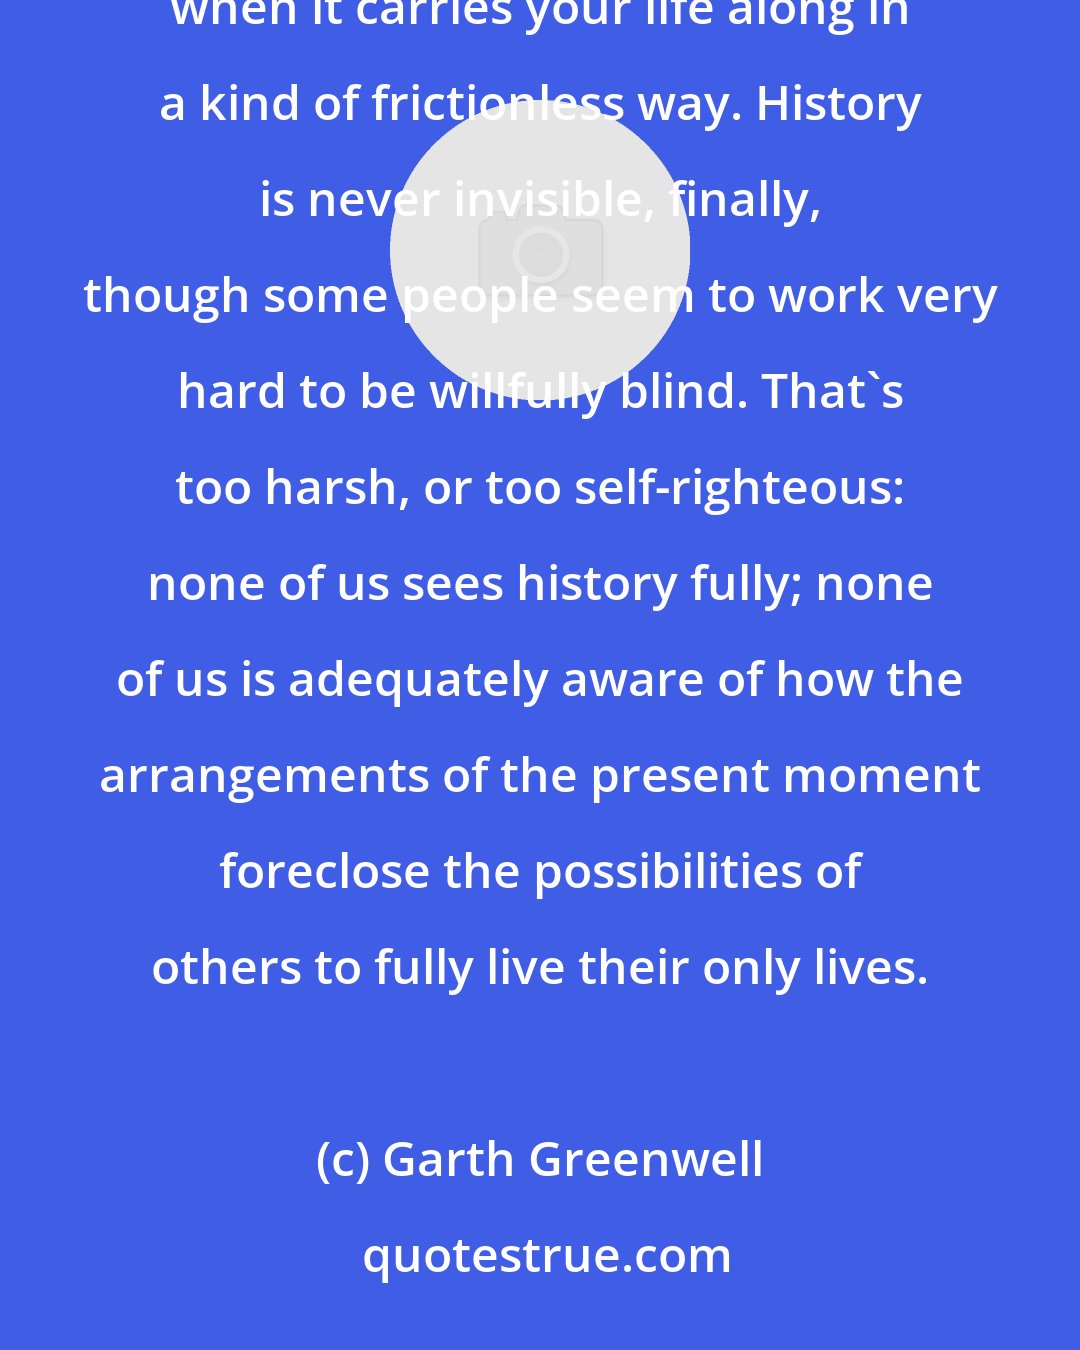 Garth Greenwell: I think history is only ever invisible when it abets your sense of self, your desires, your ambitions, when it carries your life along in a kind of frictionless way. History is never invisible, finally, though some people seem to work very hard to be willfully blind. That's too harsh, or too self-righteous: none of us sees history fully; none of us is adequately aware of how the arrangements of the present moment foreclose the possibilities of others to fully live their only lives.